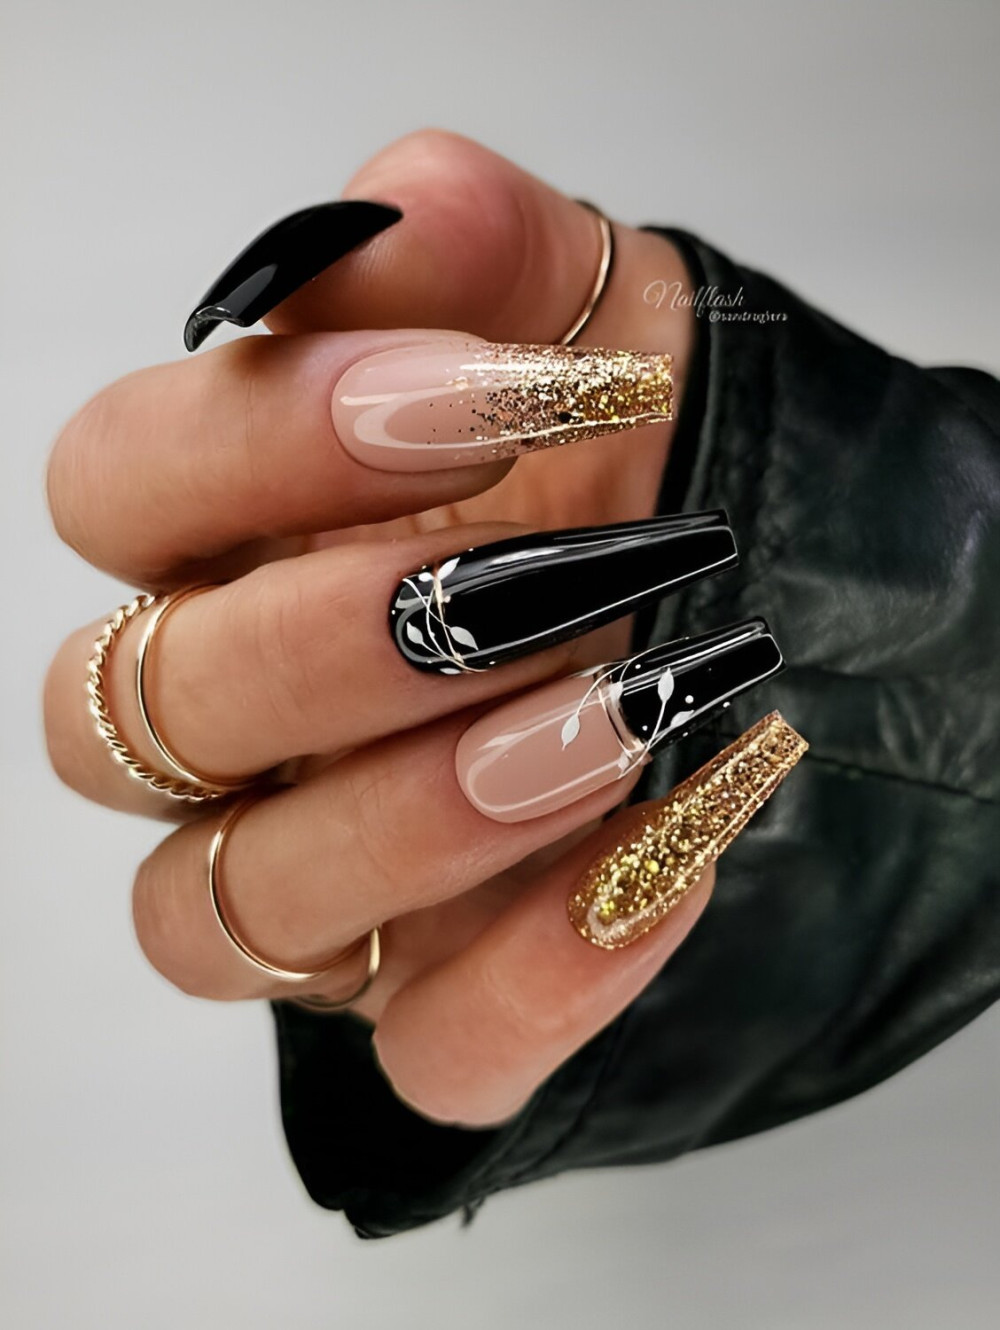 Black Nail Designs With Glitter